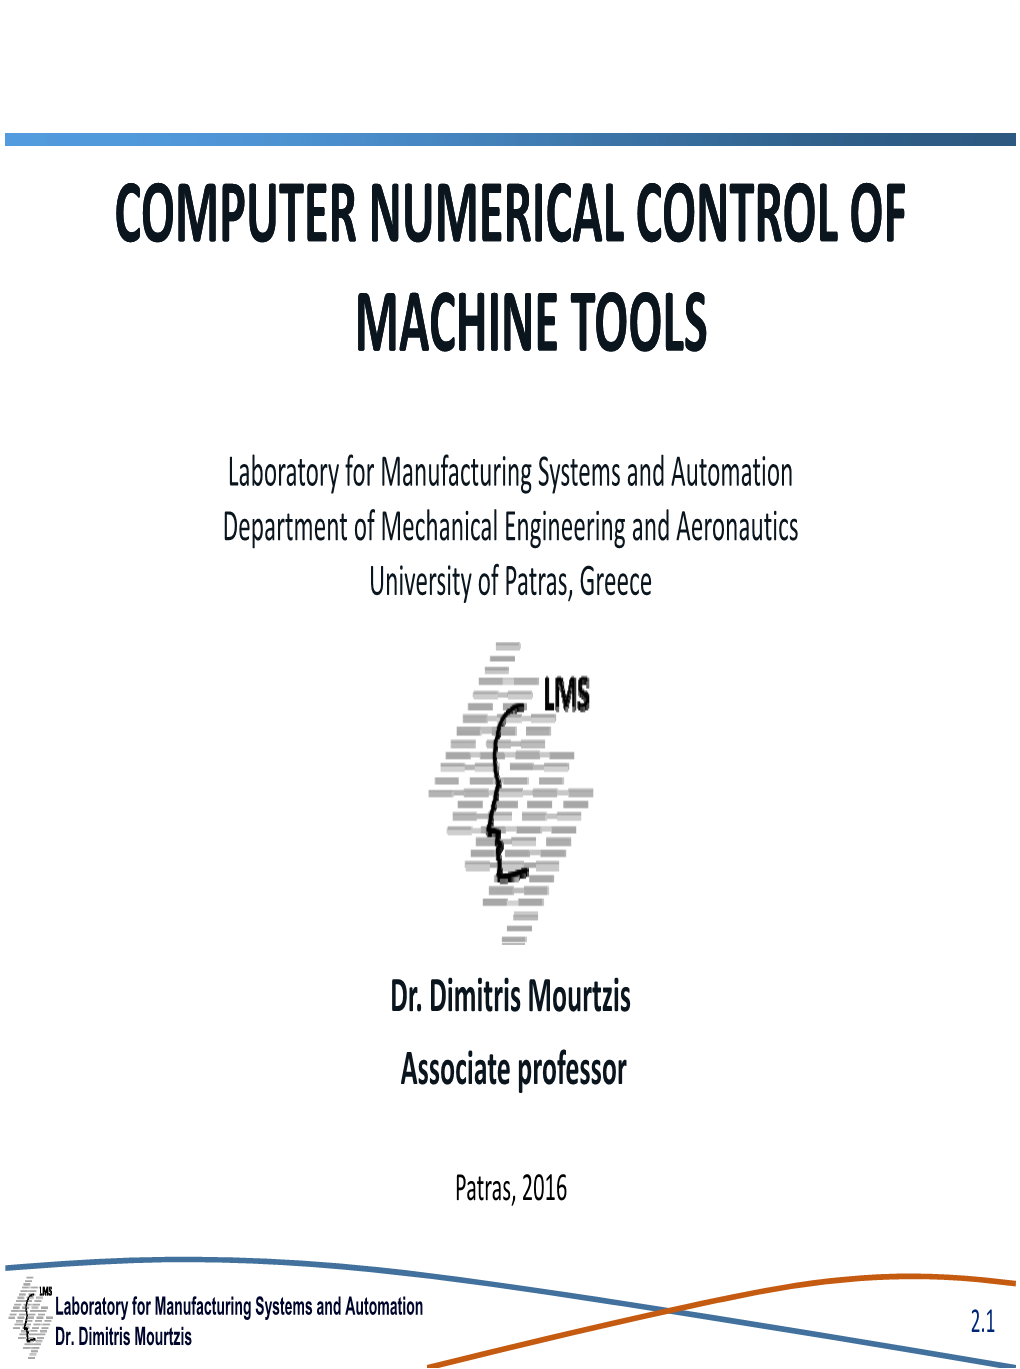 Computer Numerical Control of Machine Tools Computer